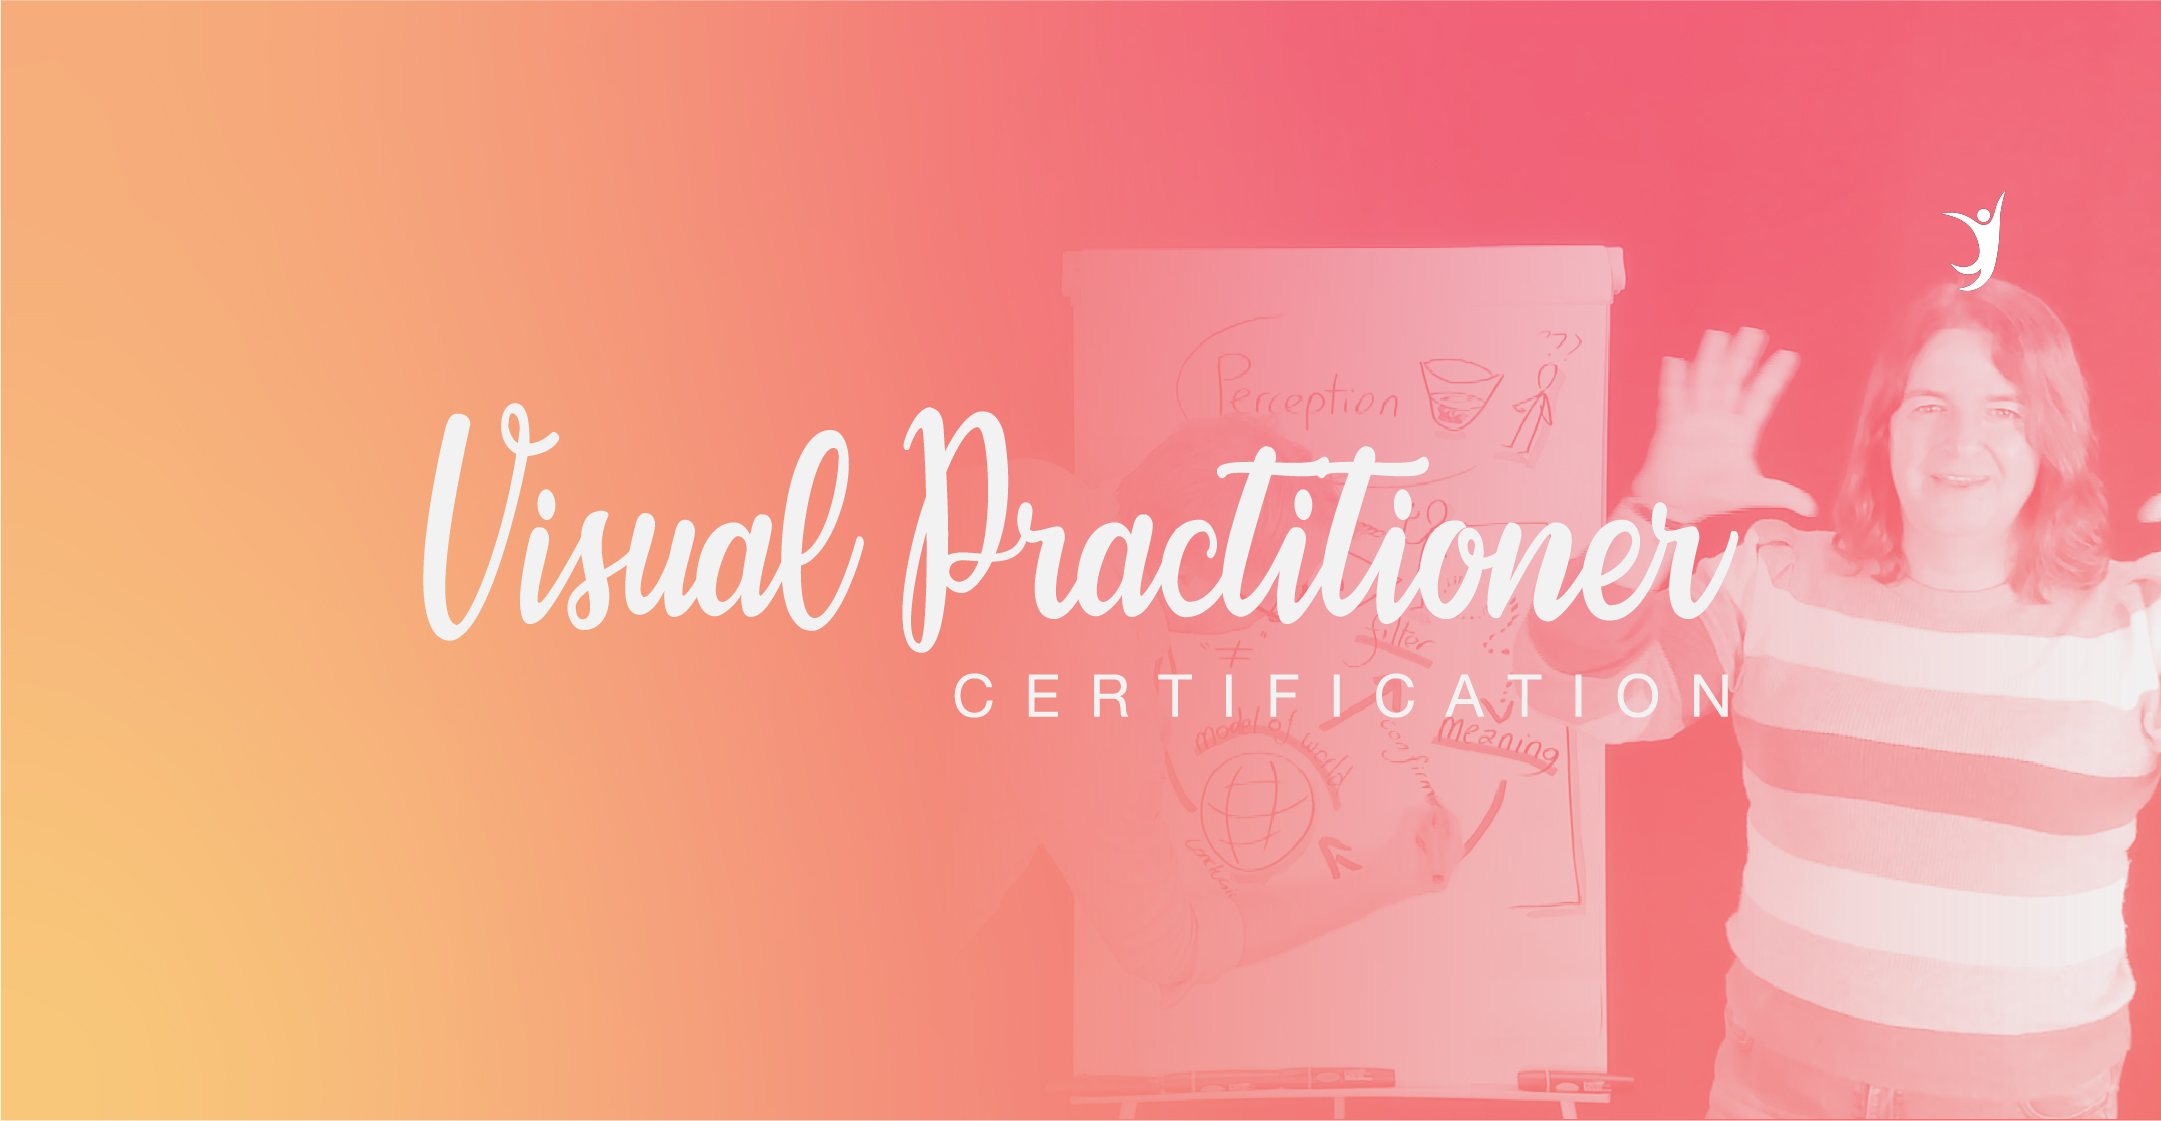 Visual Practitioner Certification